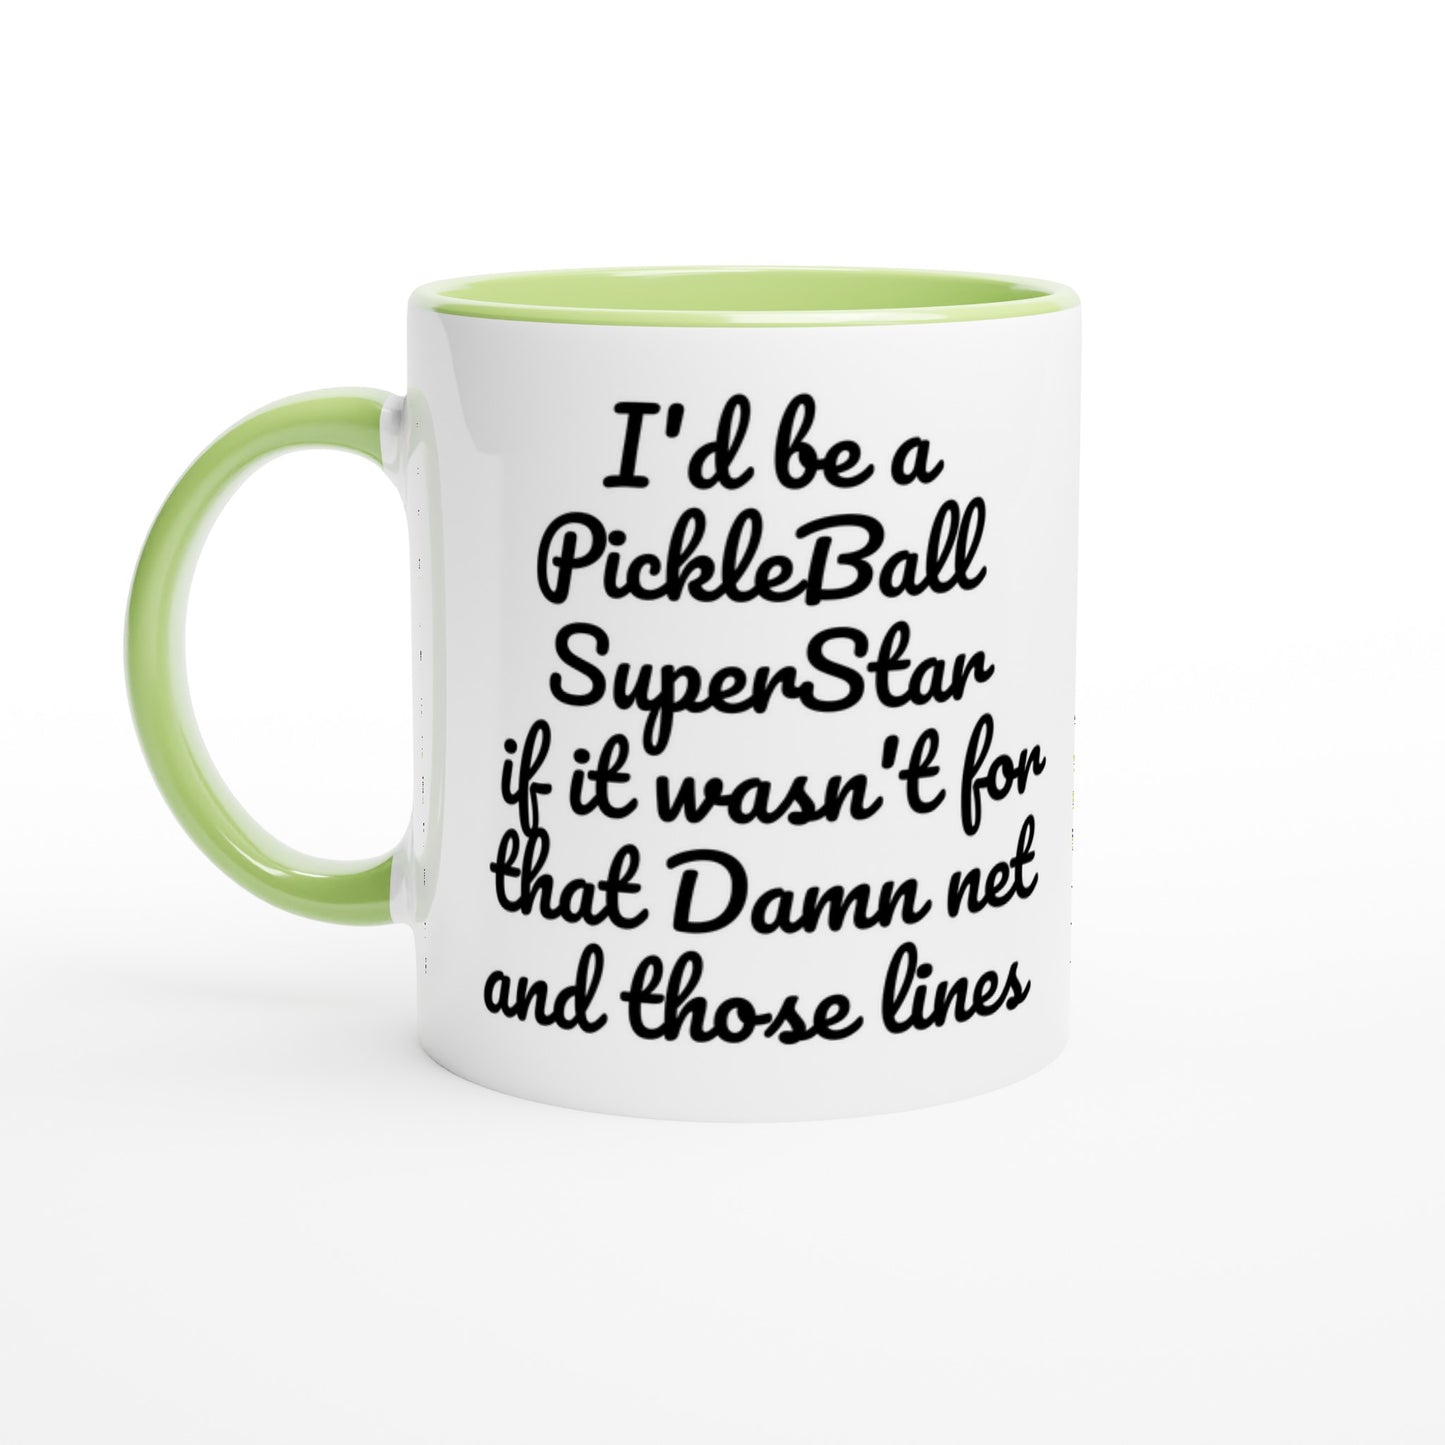 I'd be a PickleBall SuperStar if it wasn't for that Damn net and those lines on front  and Let's Play PickleBall logo on back Pickleball 11oz white ceramic mug with green handle, rim and inside coffee mug it's dishwasher safe and microwave safe.